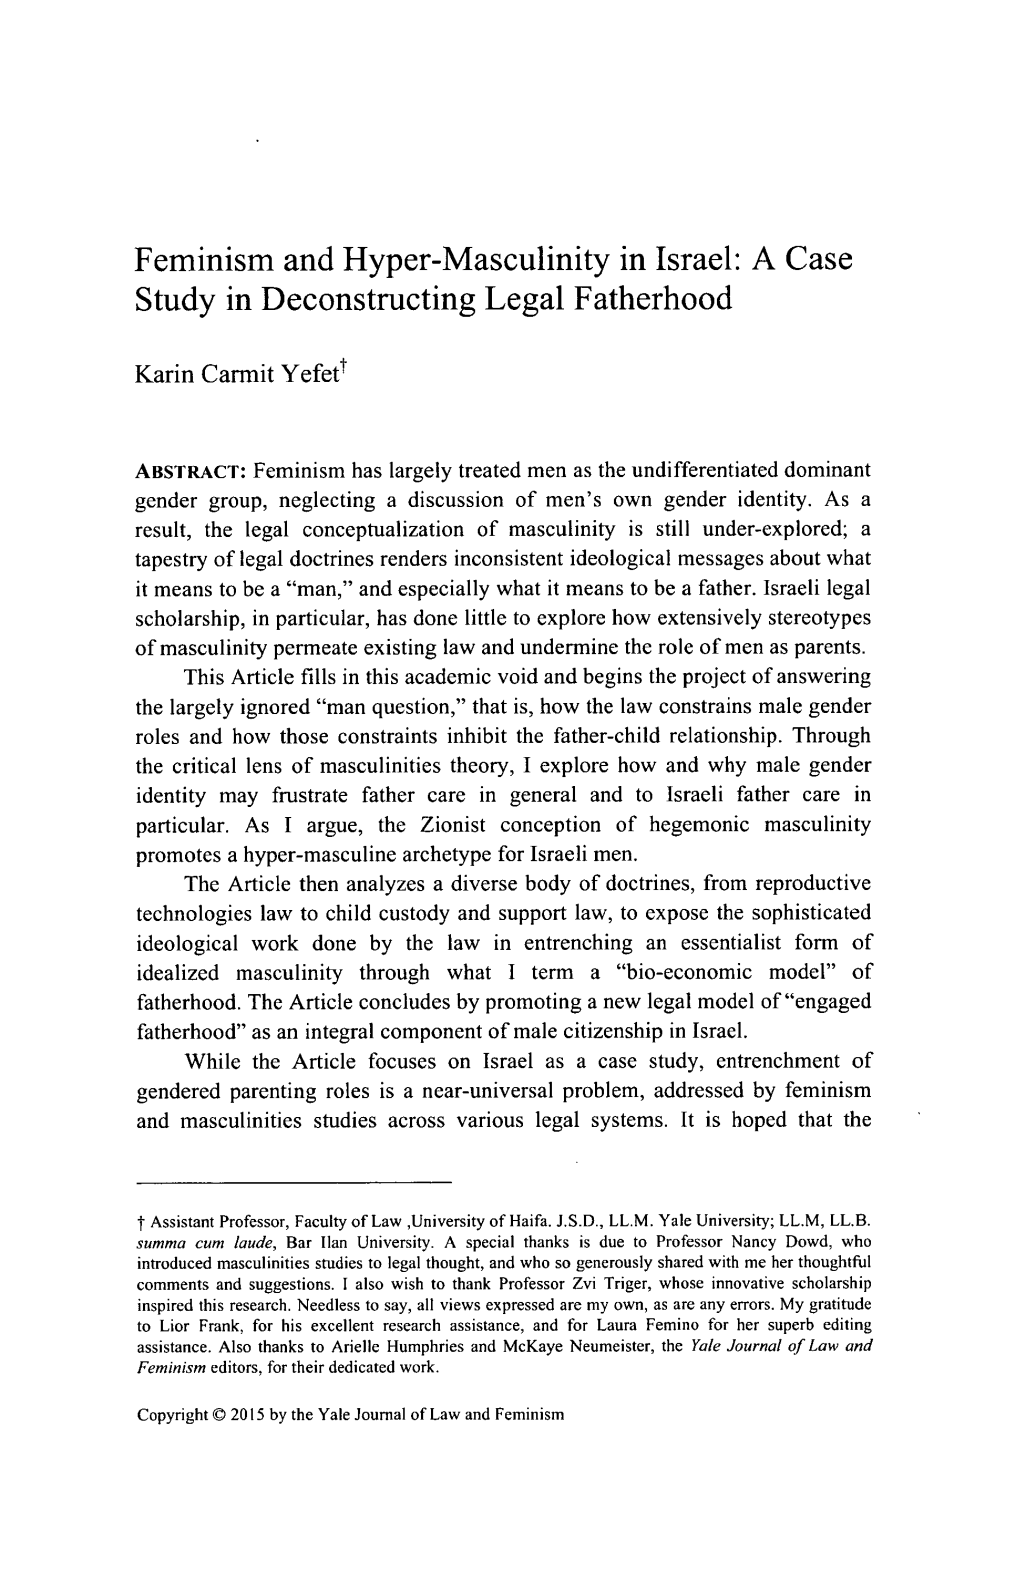 Feminism and Hyper-Masculinity in Israel: a Case Study in Deconstructing Legal Fatherhood